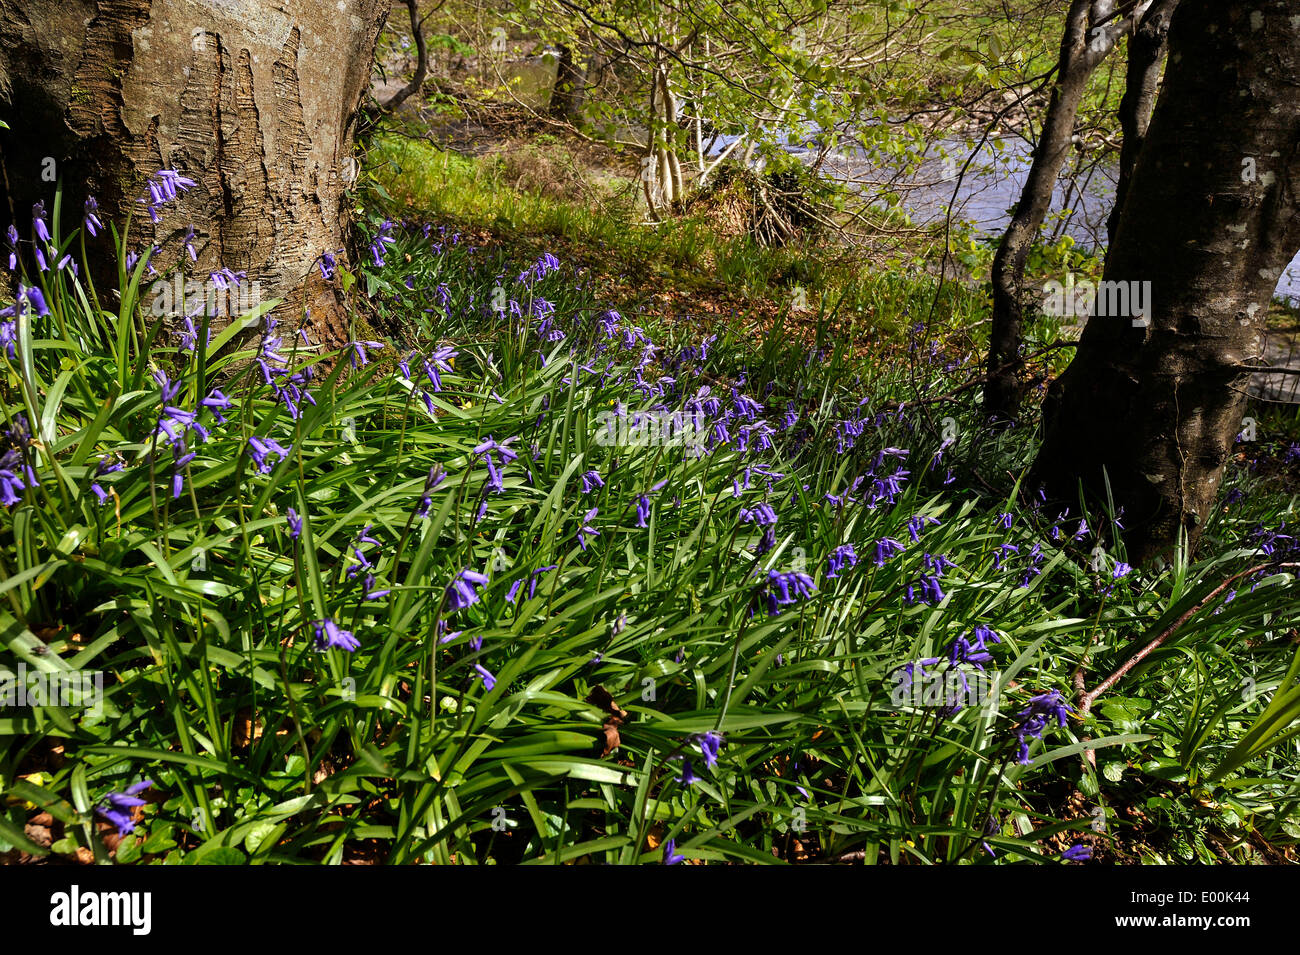 Bluebells (Hyacinthoides non-scripta) a bulbous perennial plant growing in woodland at Swan Park, Buncrana, County Donegal, Irel Stock Photo